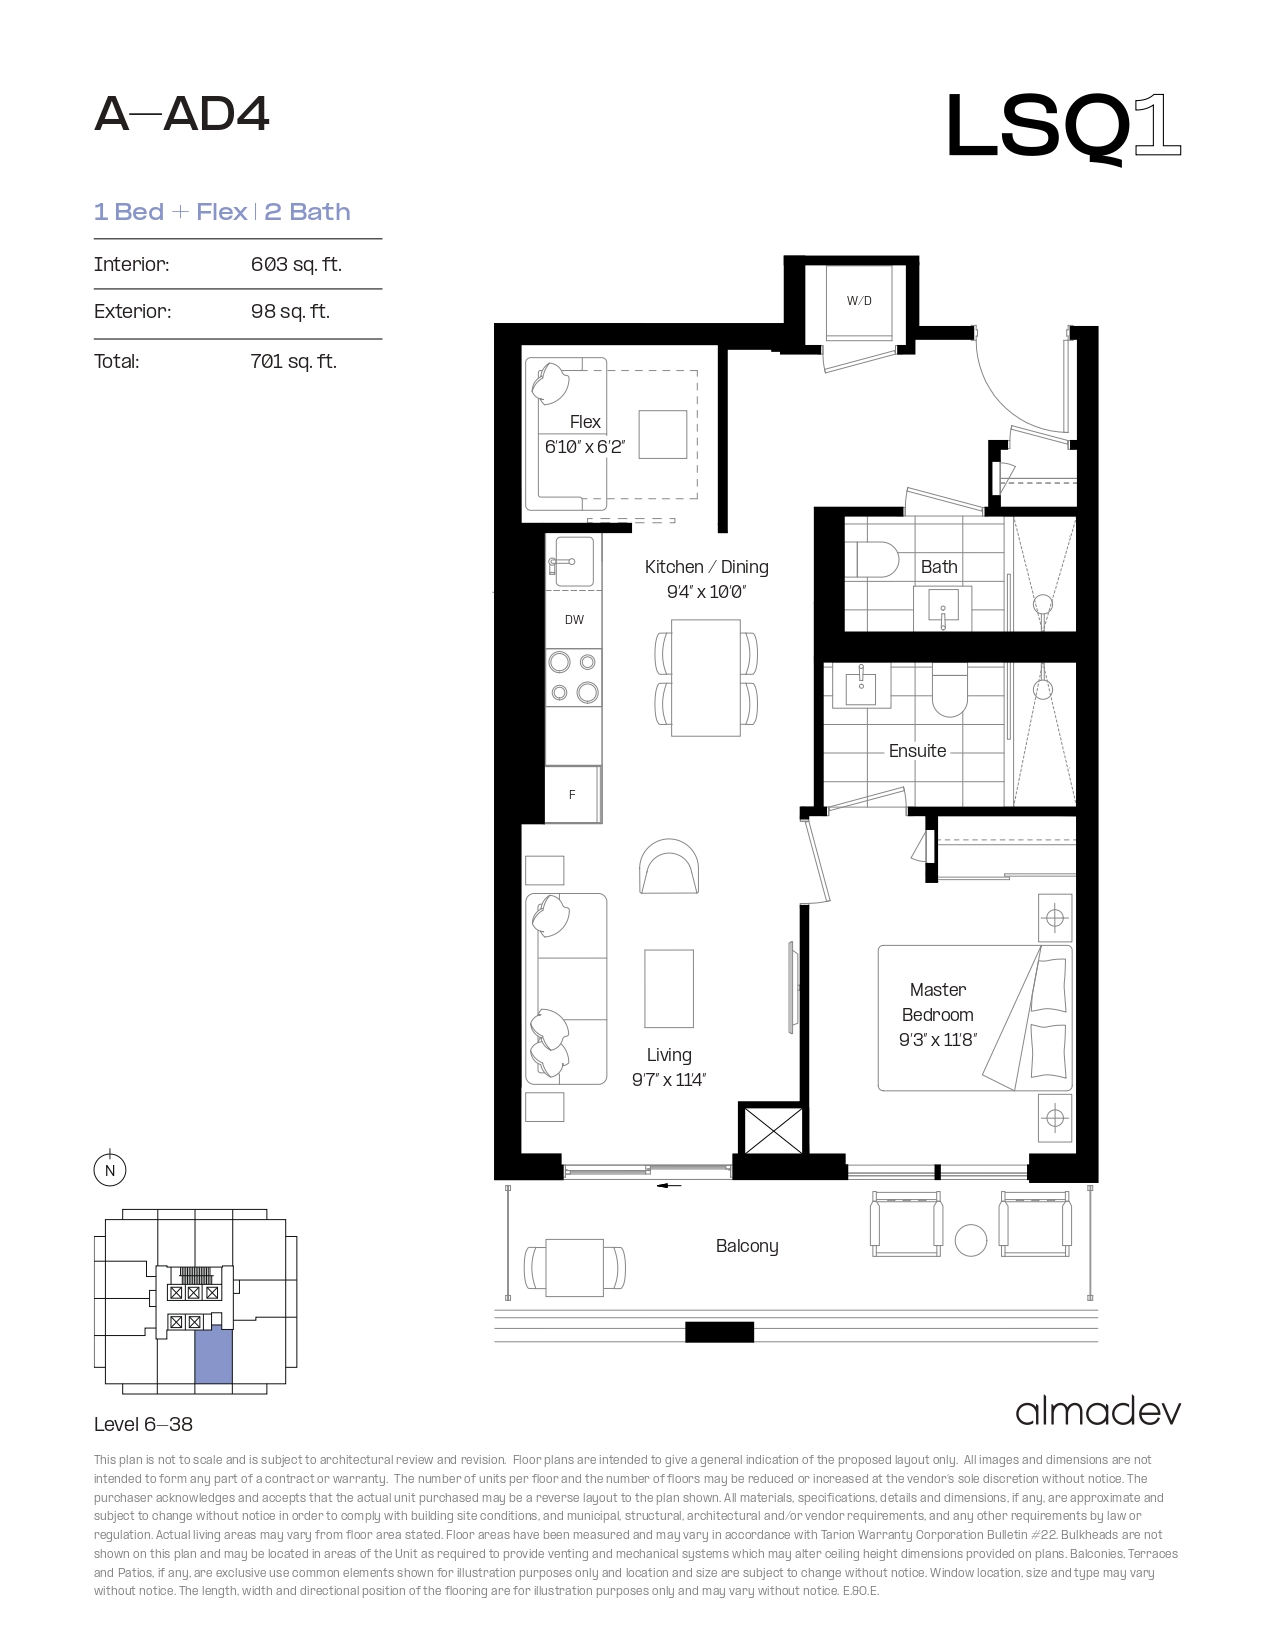 A-AD4 Floor Plan of LSQ Condos with undefined beds